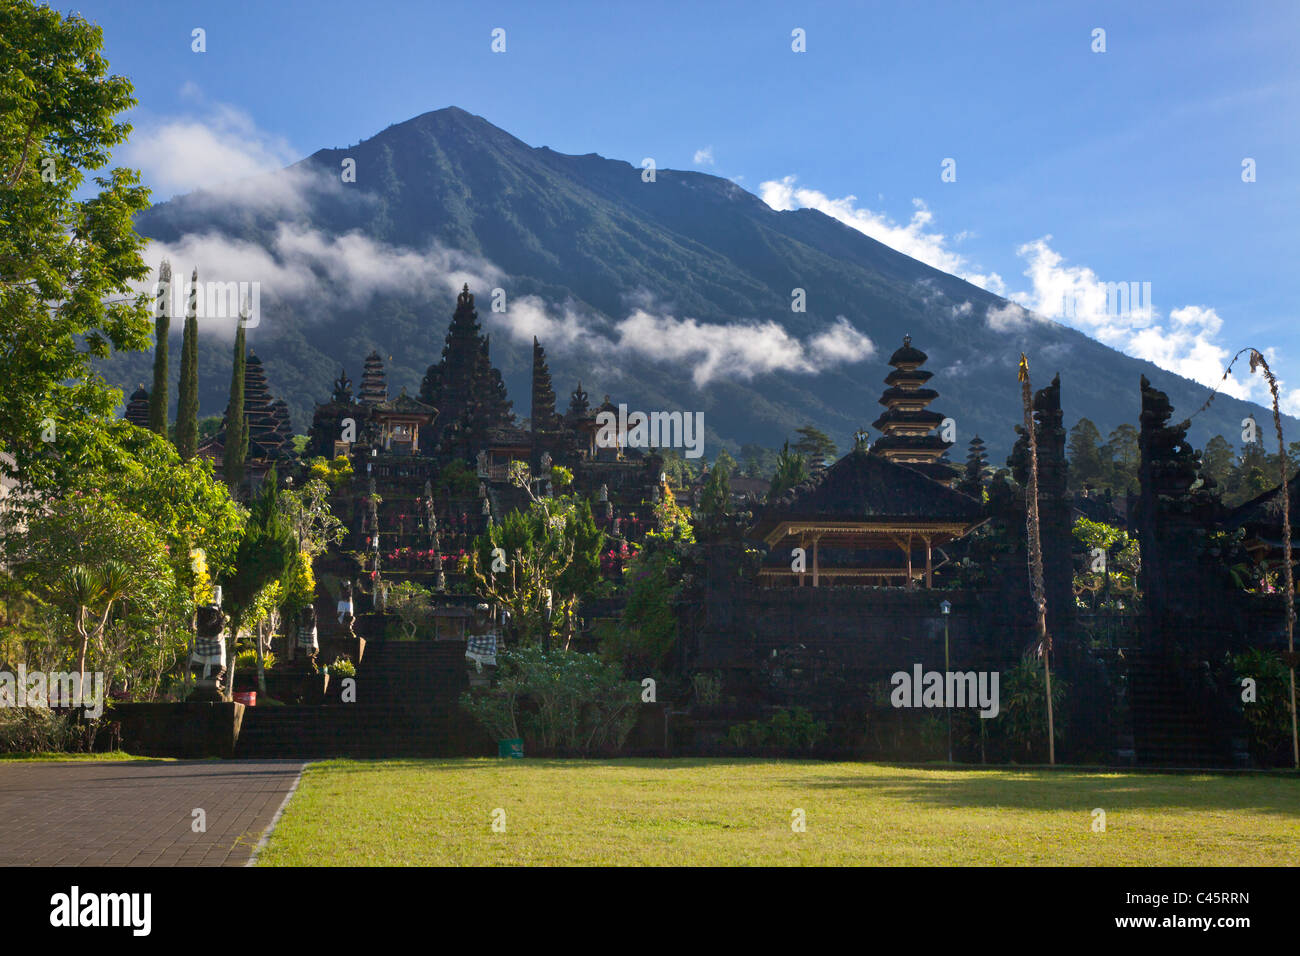 The PURA BESAKIH COMPLEX is located on the slope of sacred GUNUNG AGUNG, the islands tallest mountain - BALI, INDONESIA Stock Photo